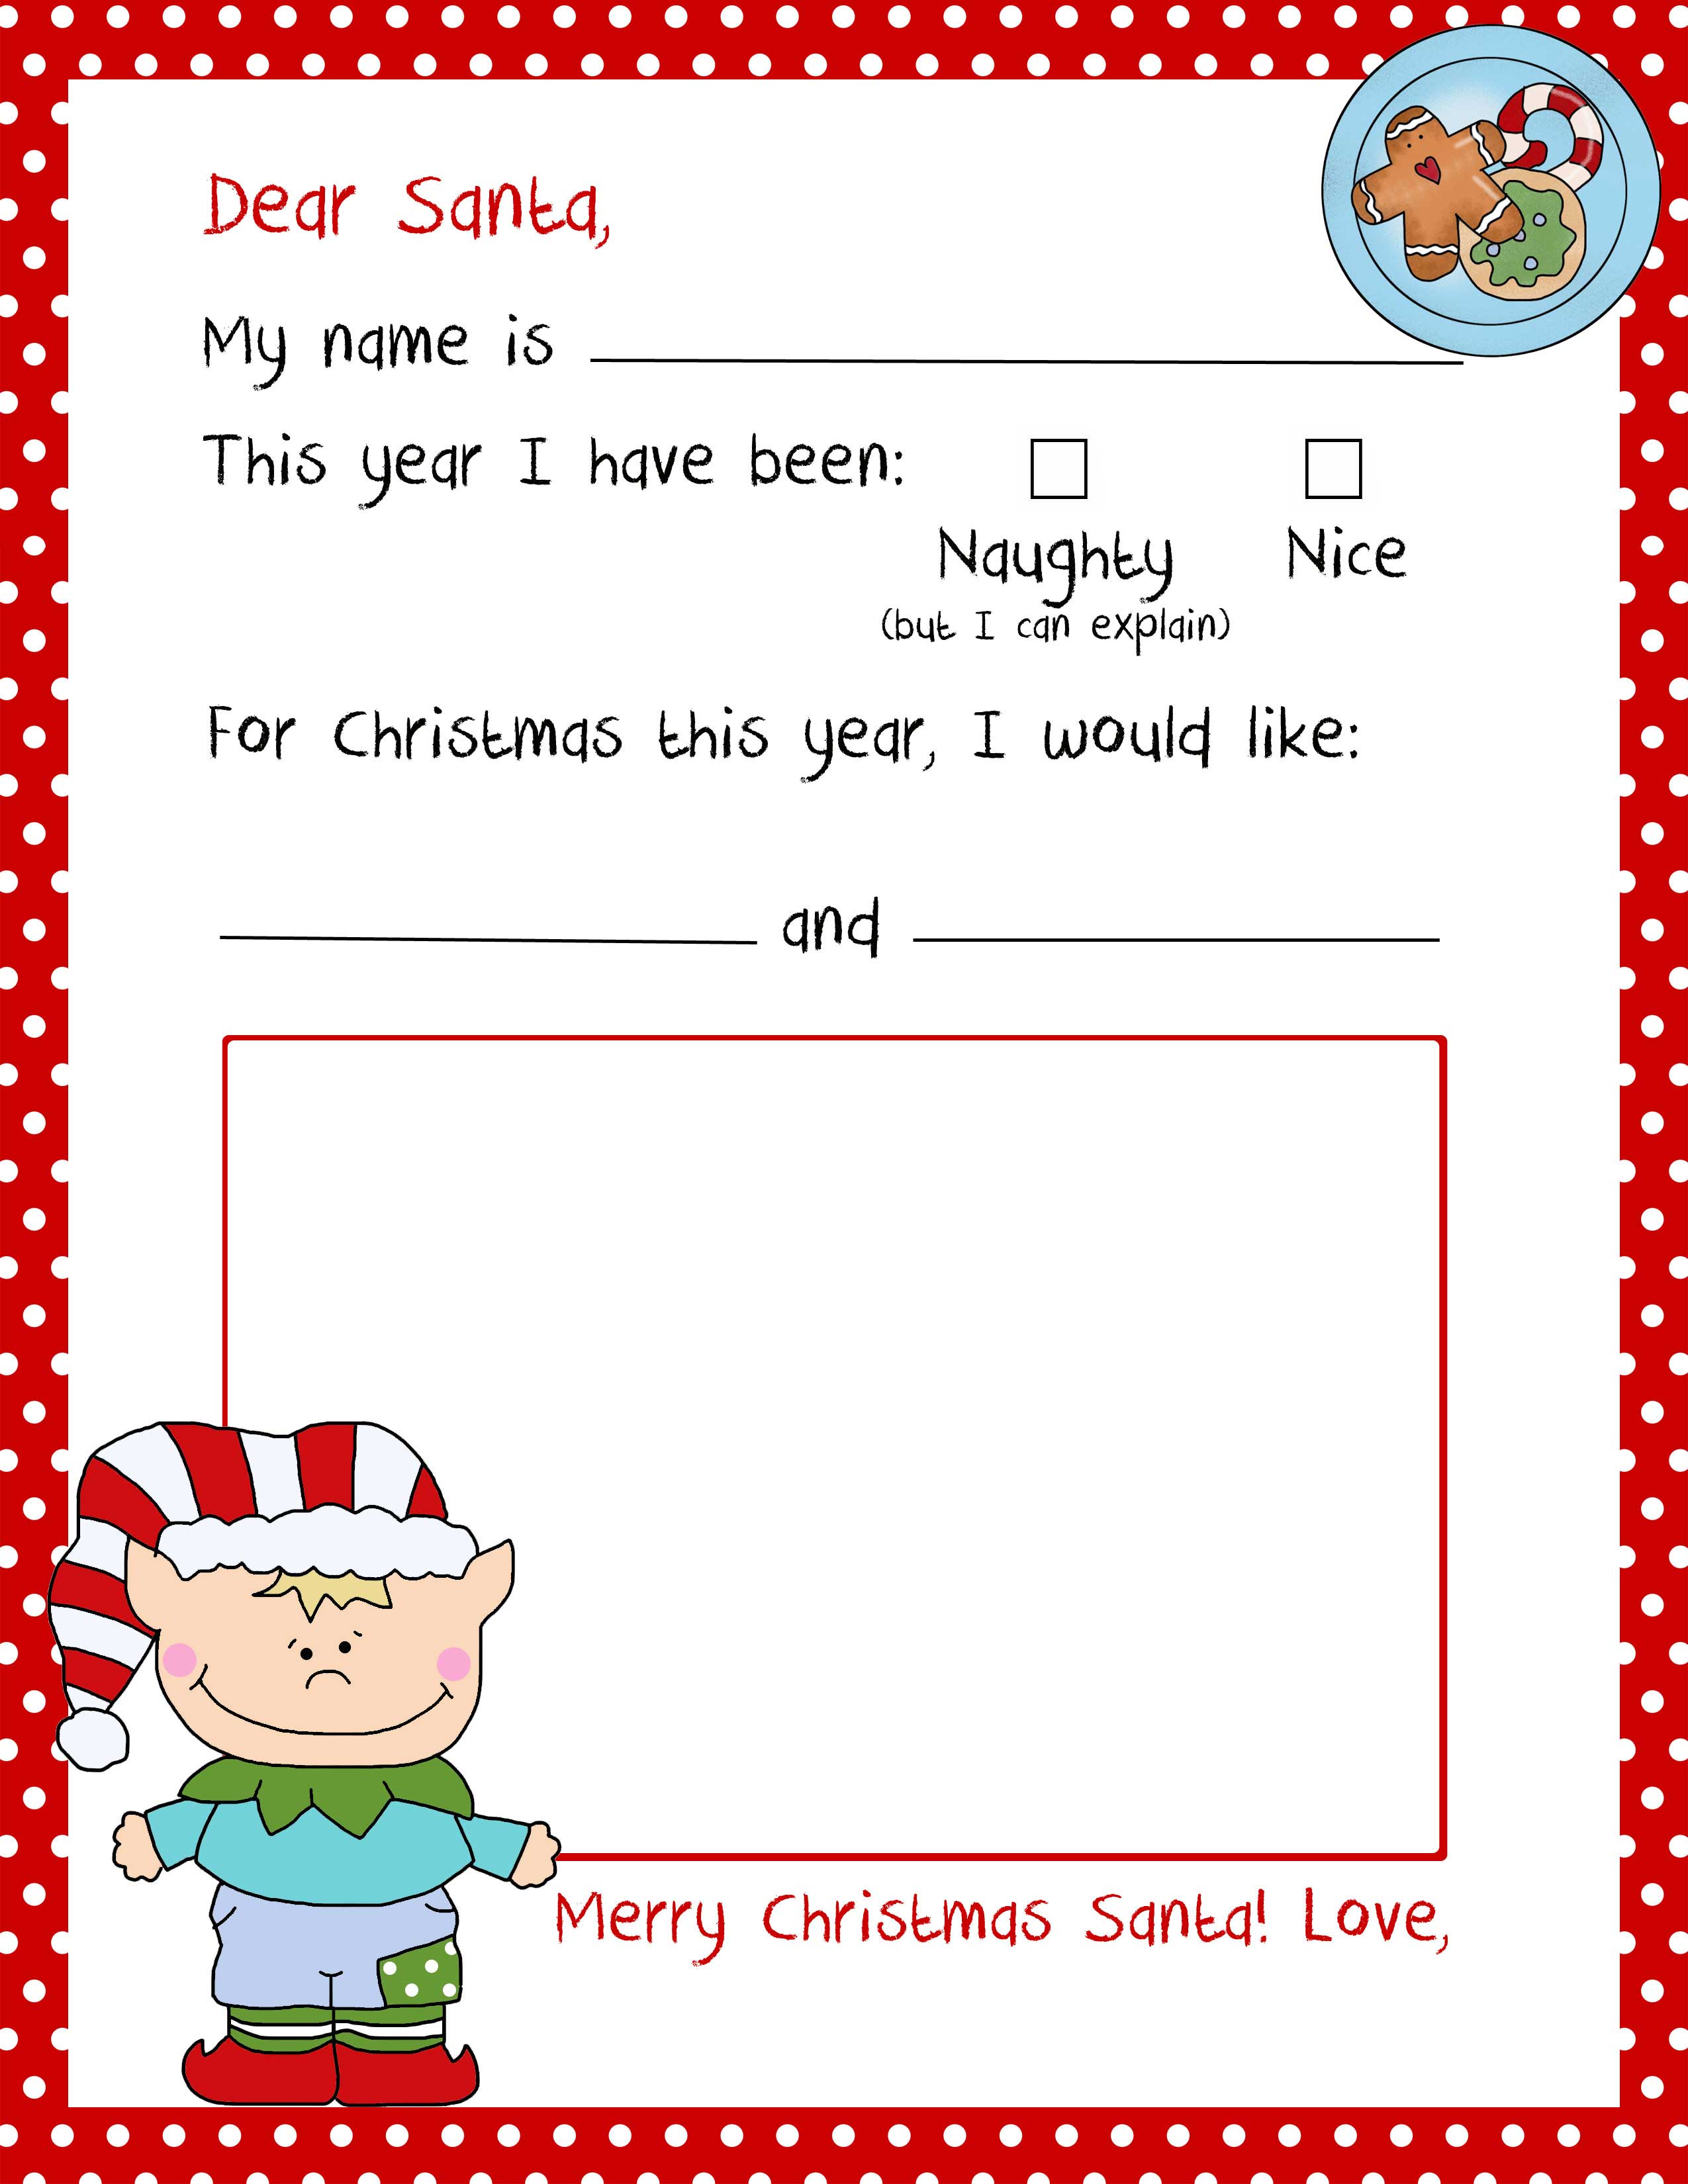 Letter To Santa Claus Wallpapers High Quality | Download Free